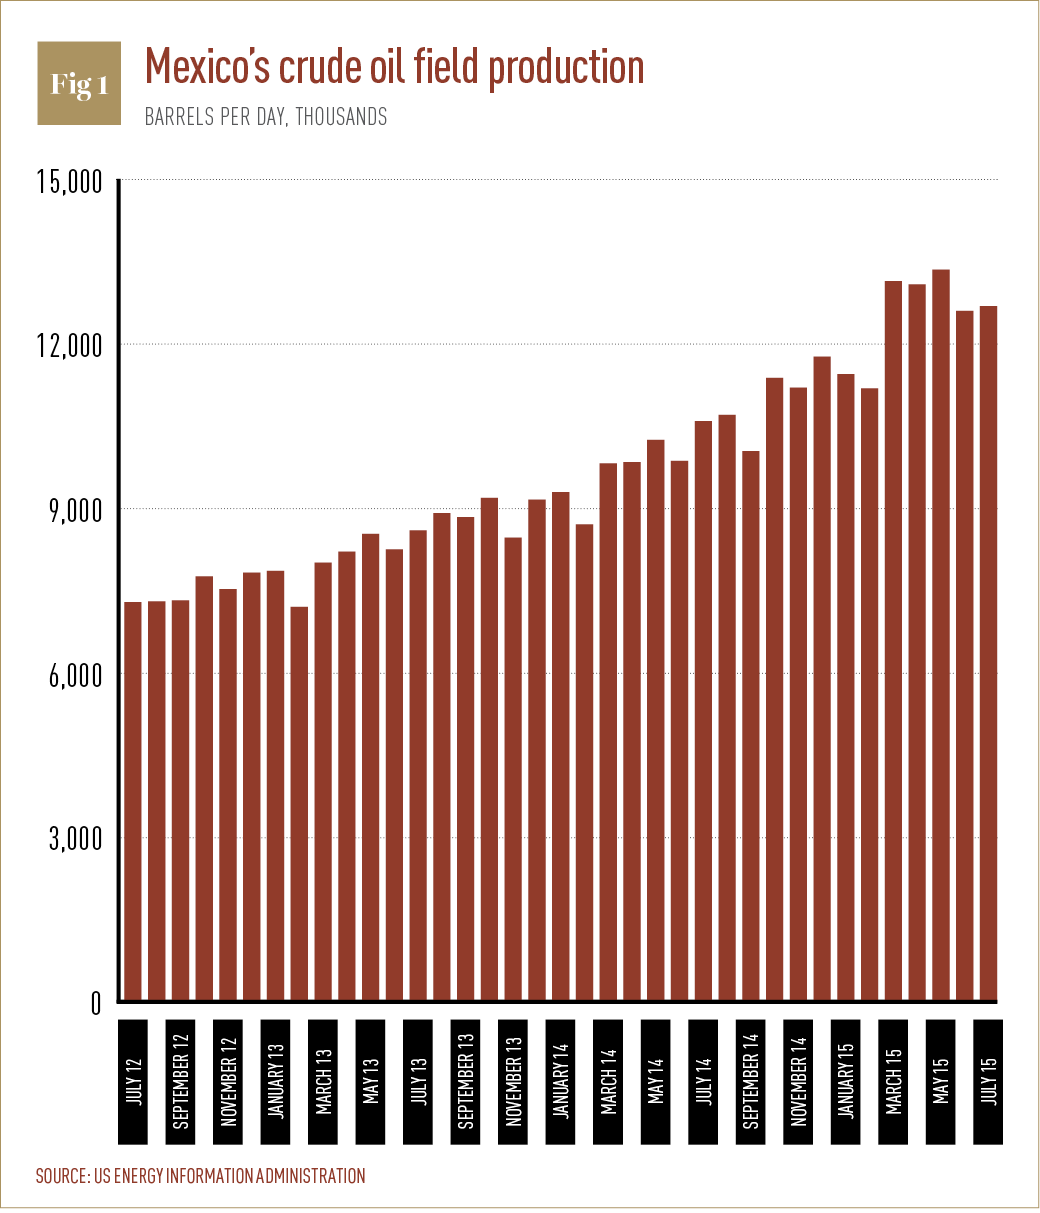 Mexico's crude oil field production